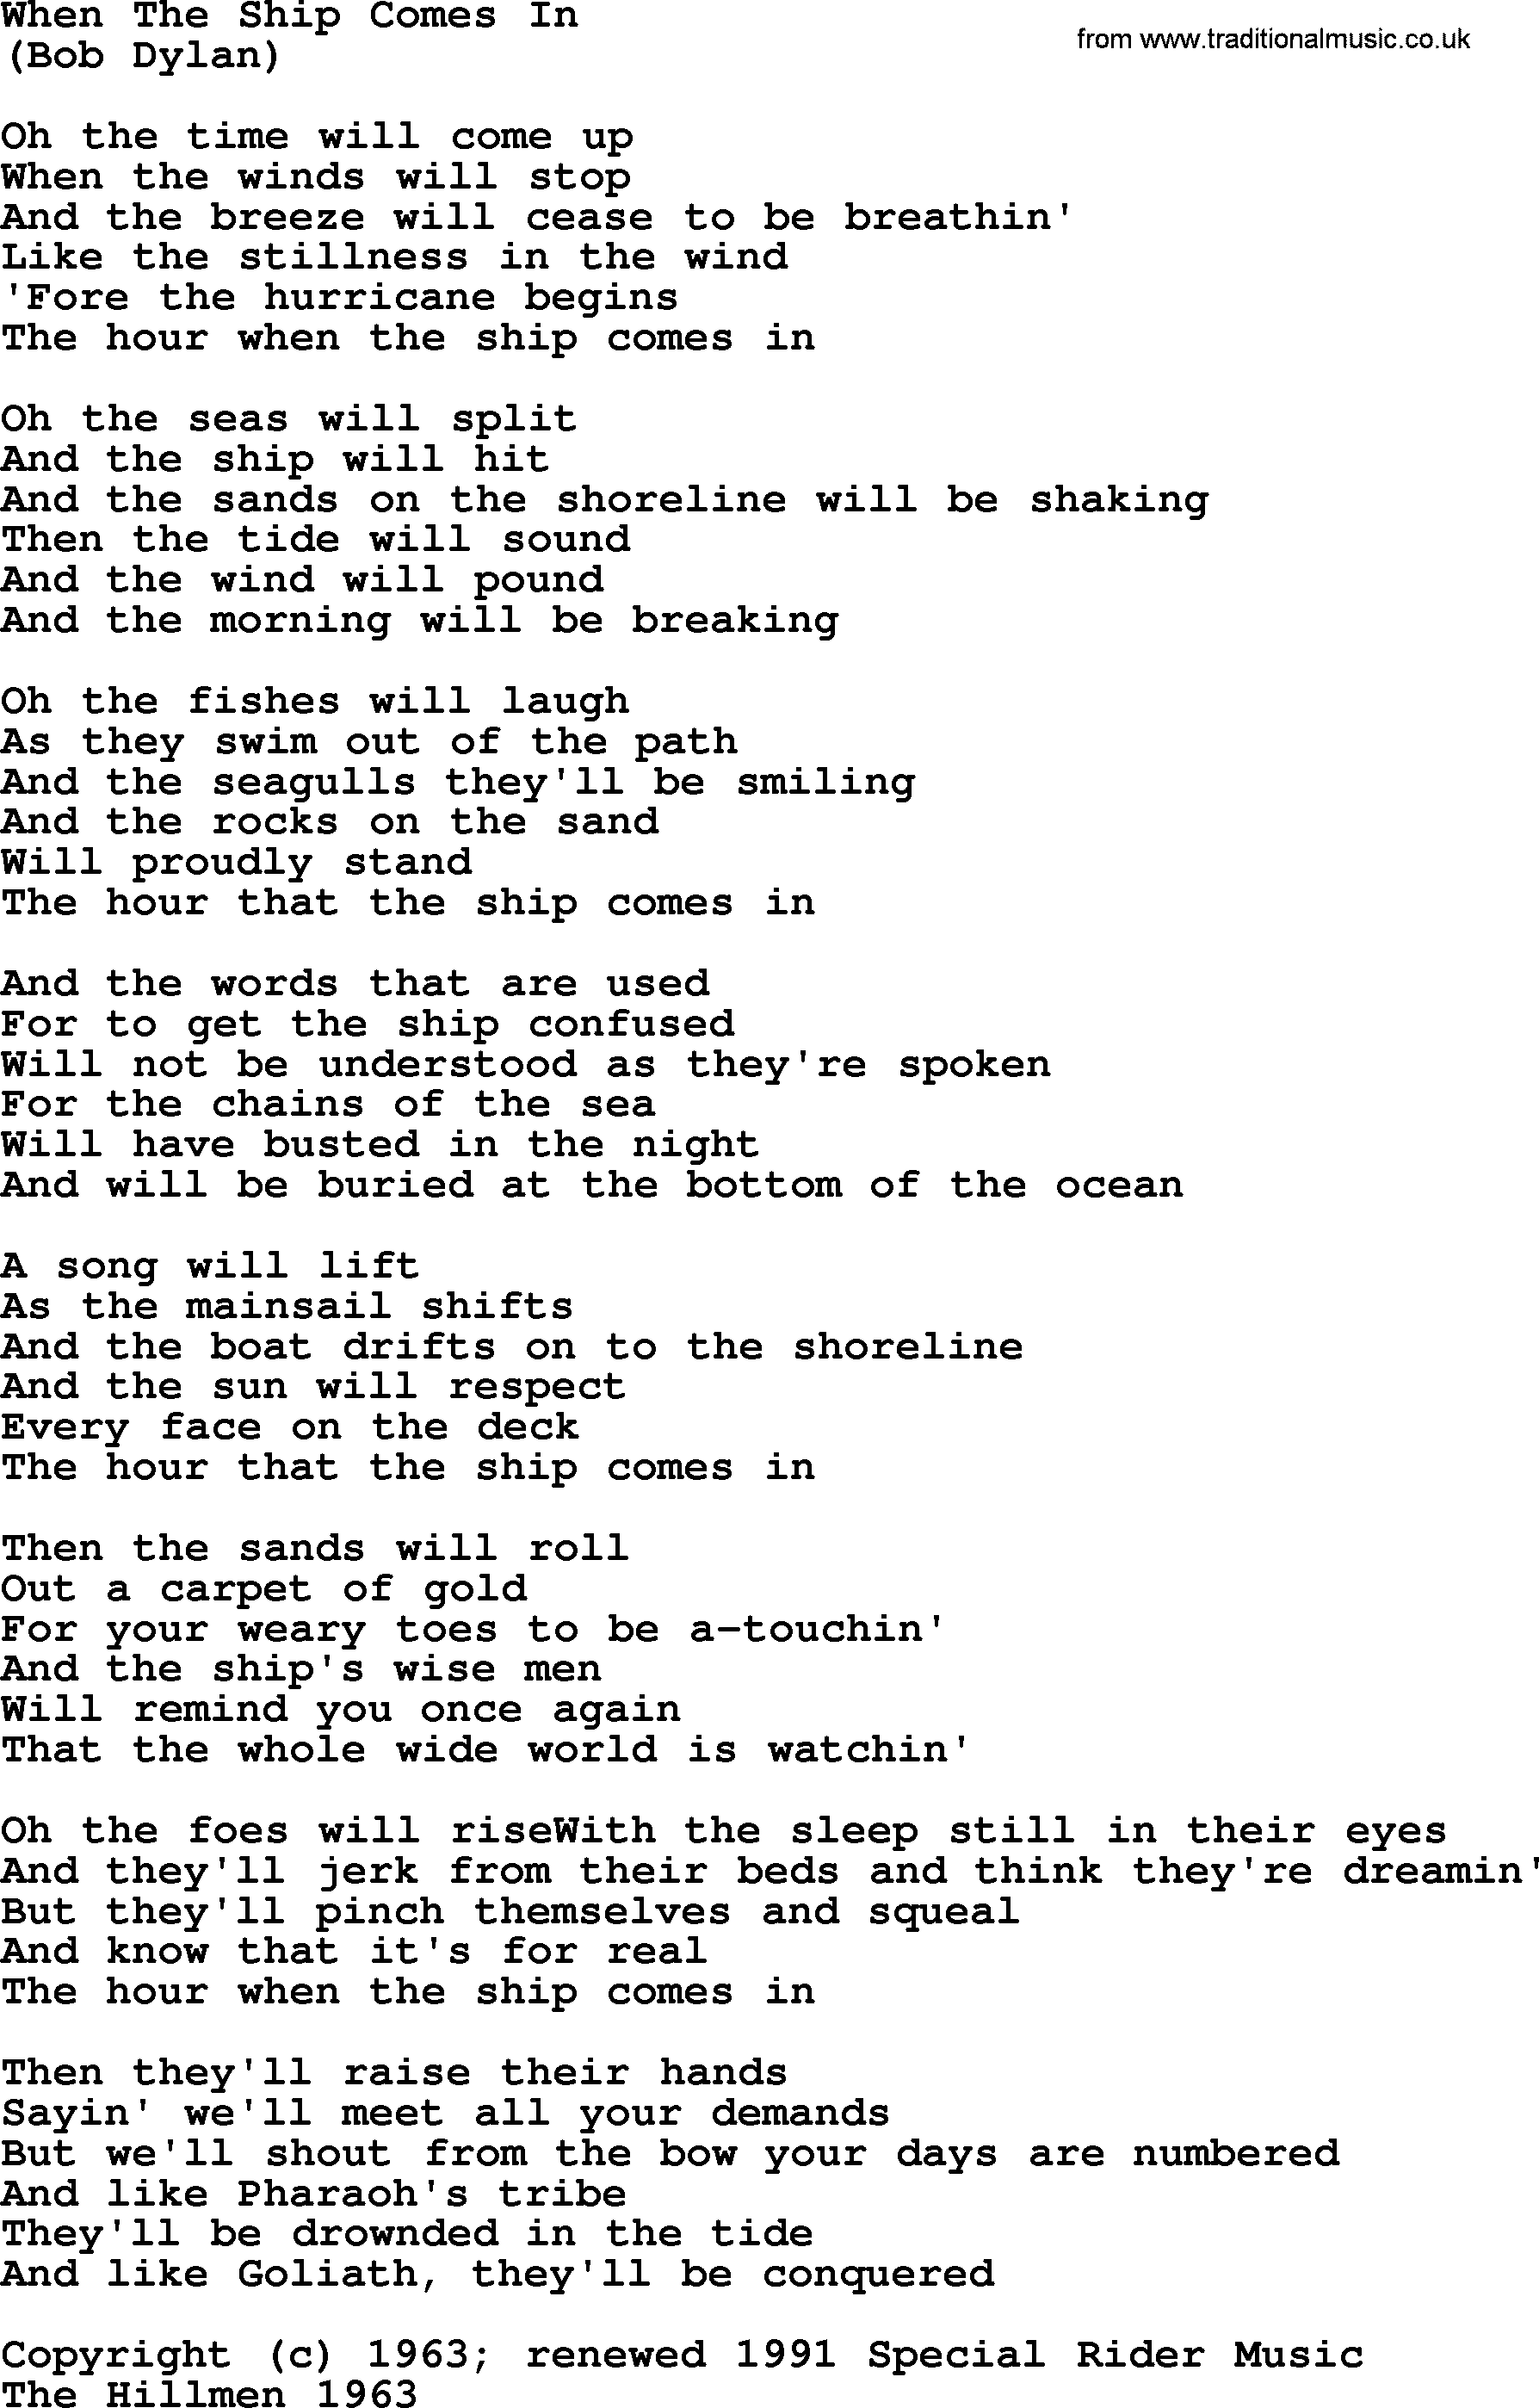 The Byrds song When The Ship Comes In, lyrics